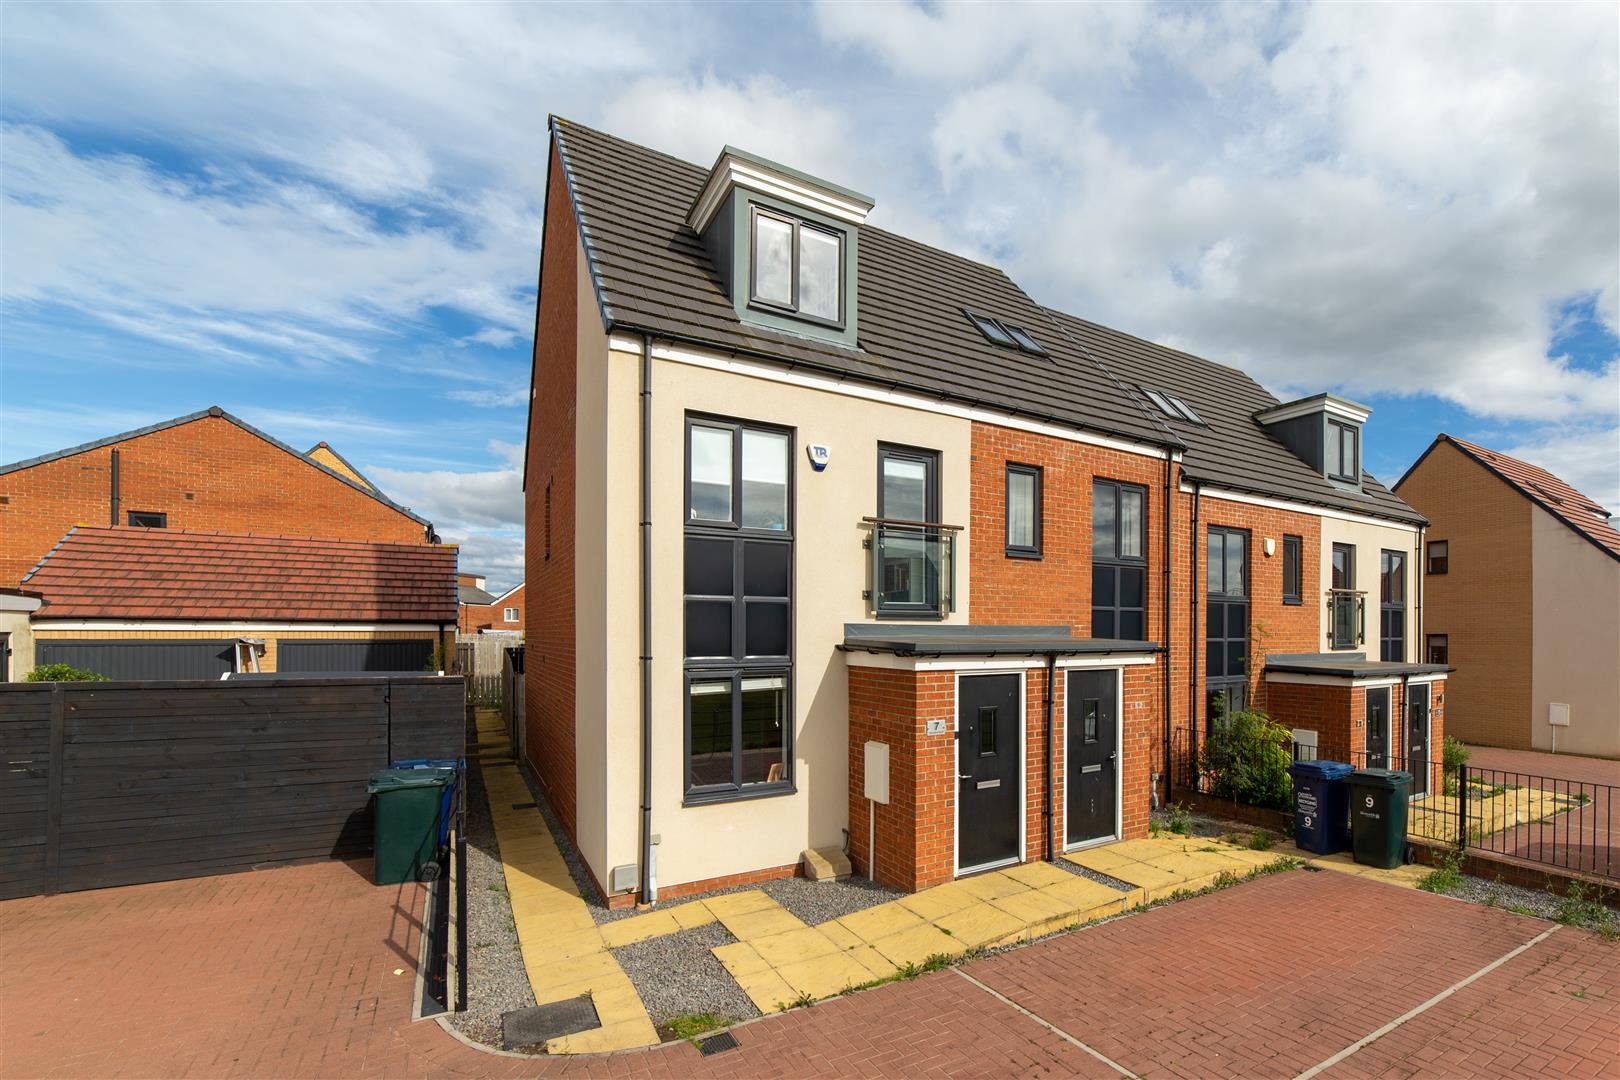 3 bed town house for sale in Maynard Street, Great Park, NE13